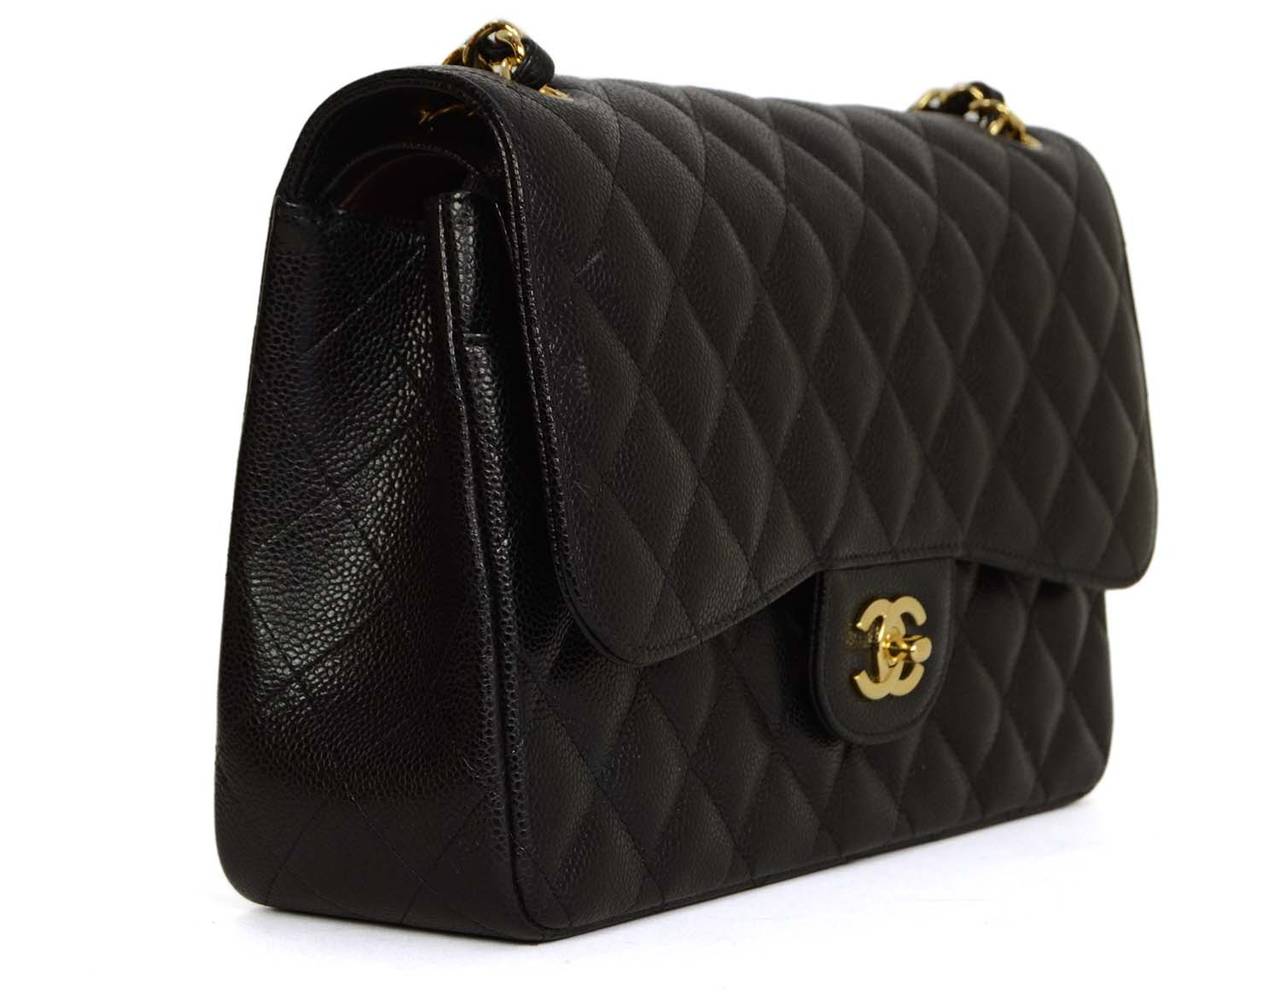 Chanel Black Quilted Caviar Jumbo Classic Double Flap Bag
Features adjustable shoulder strap
Made in: Italy
Year of Production: 2014
Color: Black and goldtone
Hardware: Goldtone
Materials: Caviar leather and metal
Lining: Black and burgundy